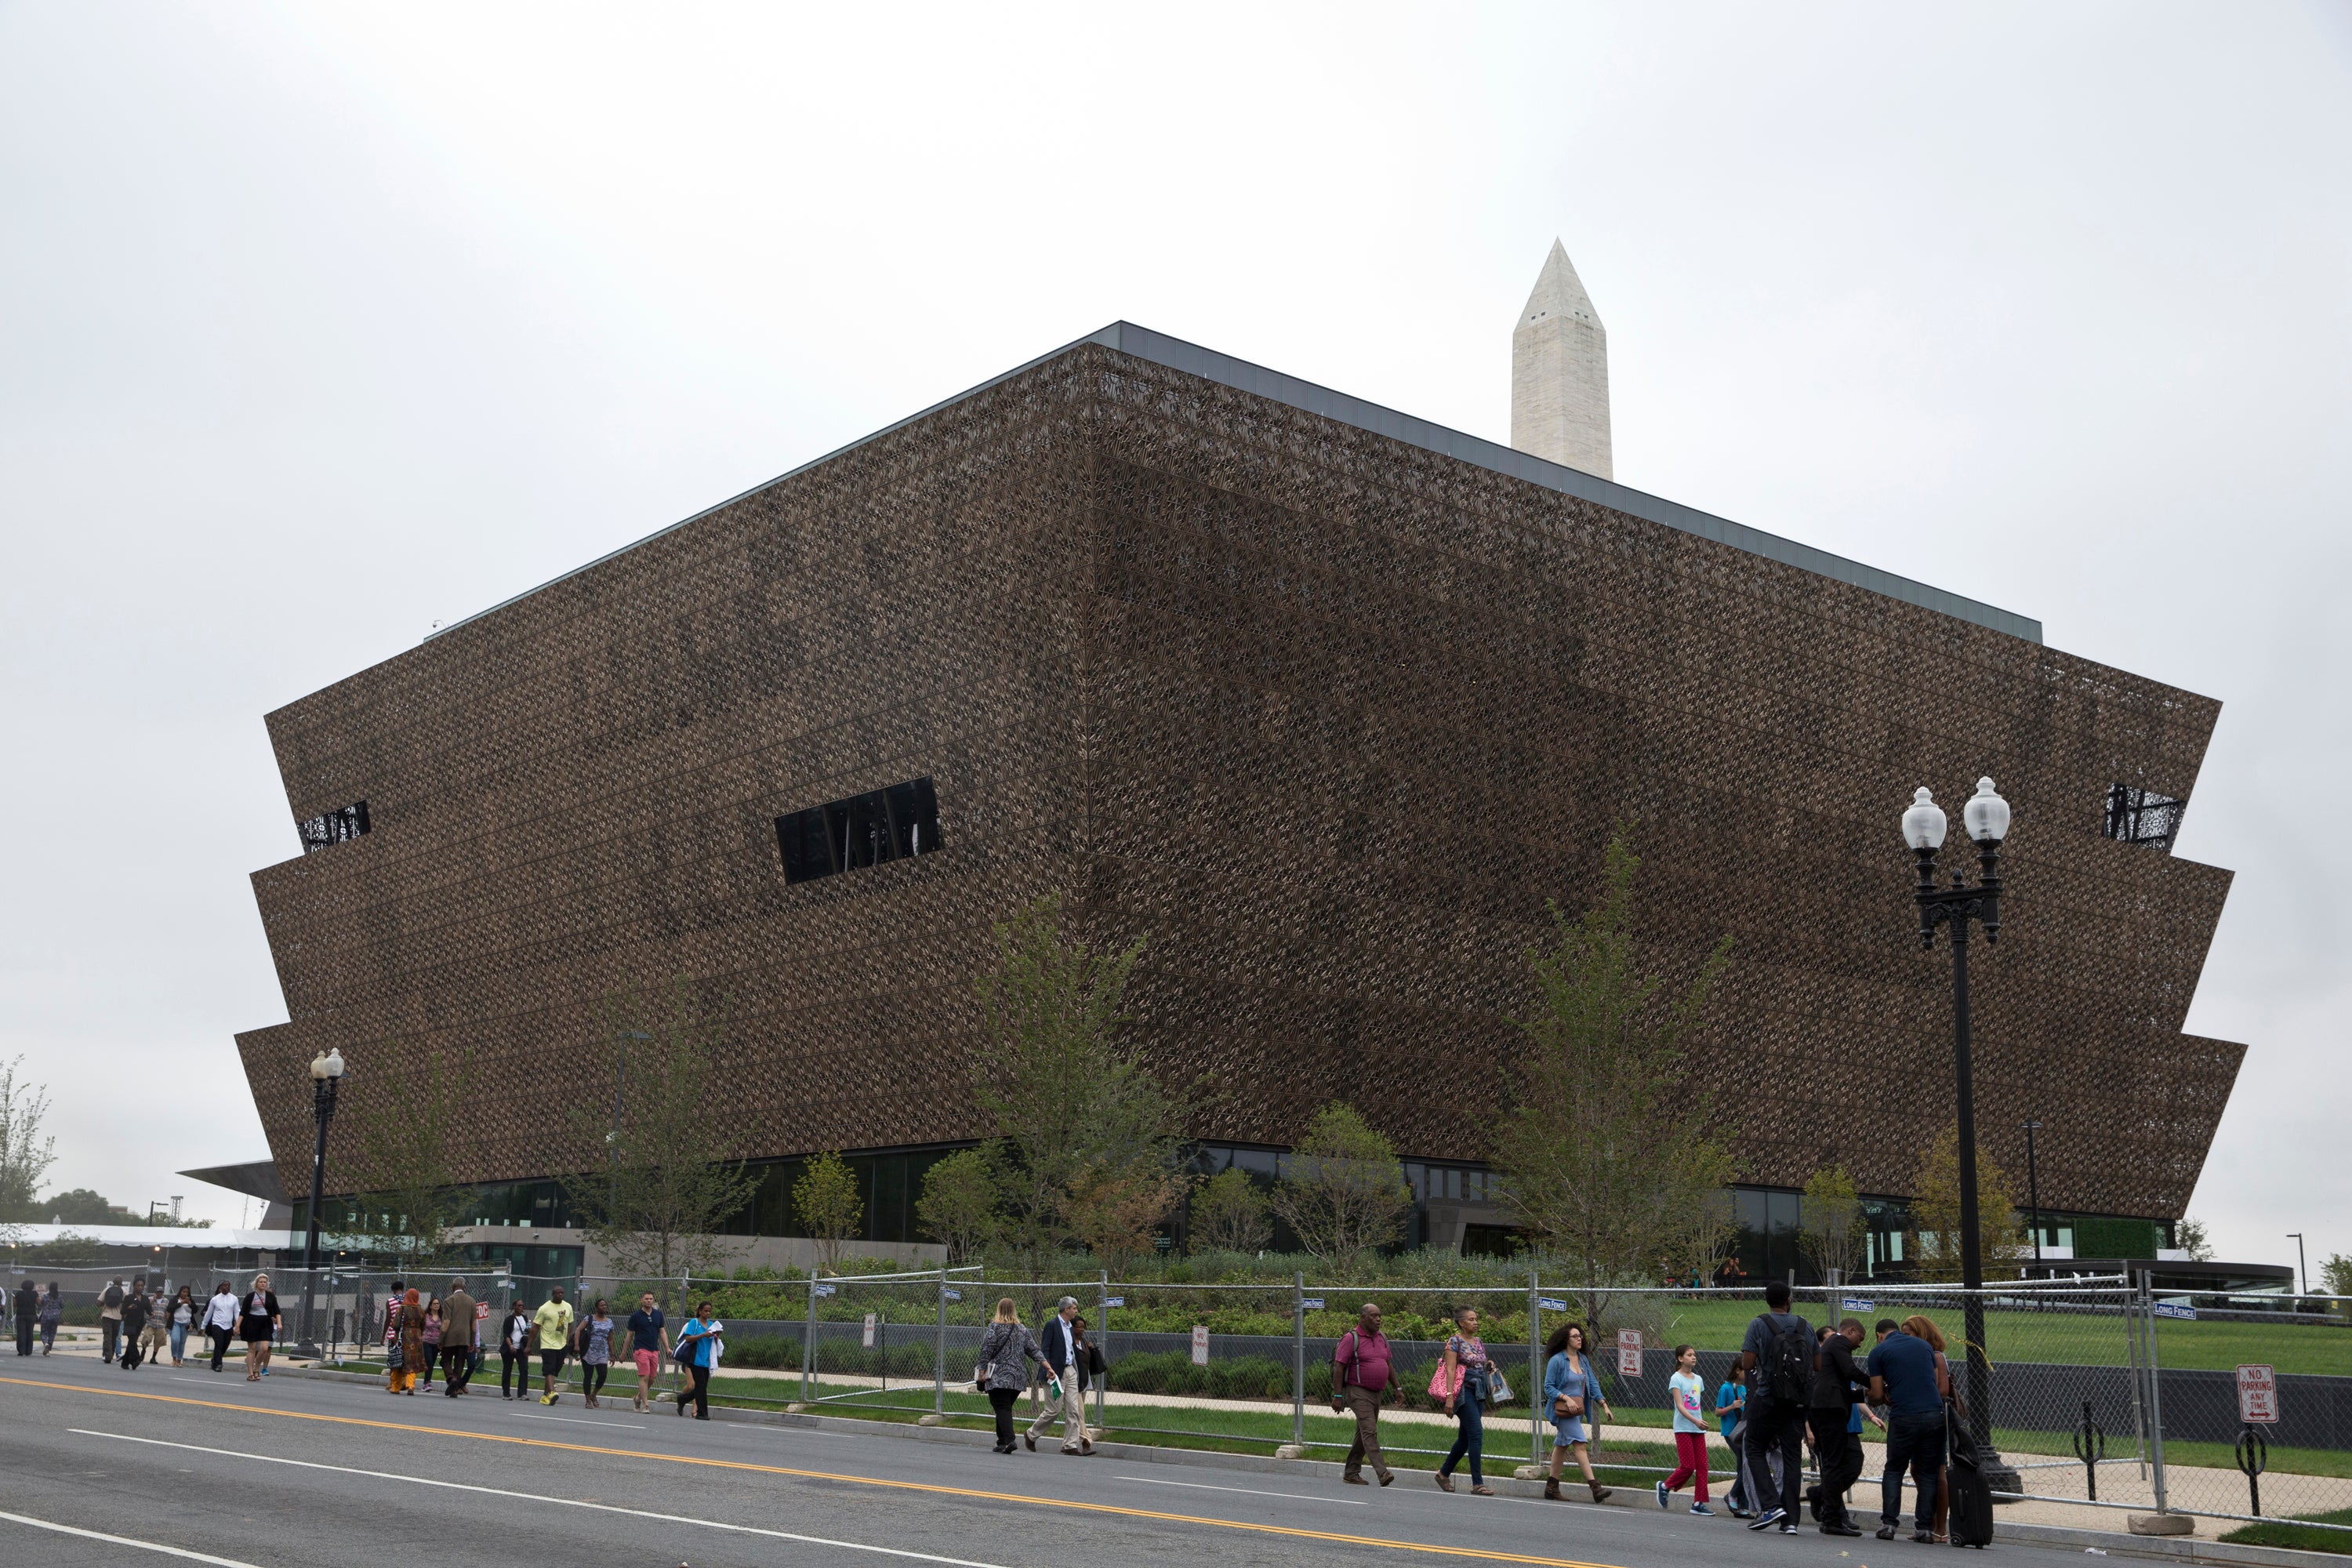 A Noose Was Found At The National Museum Of African American History In D.C.
